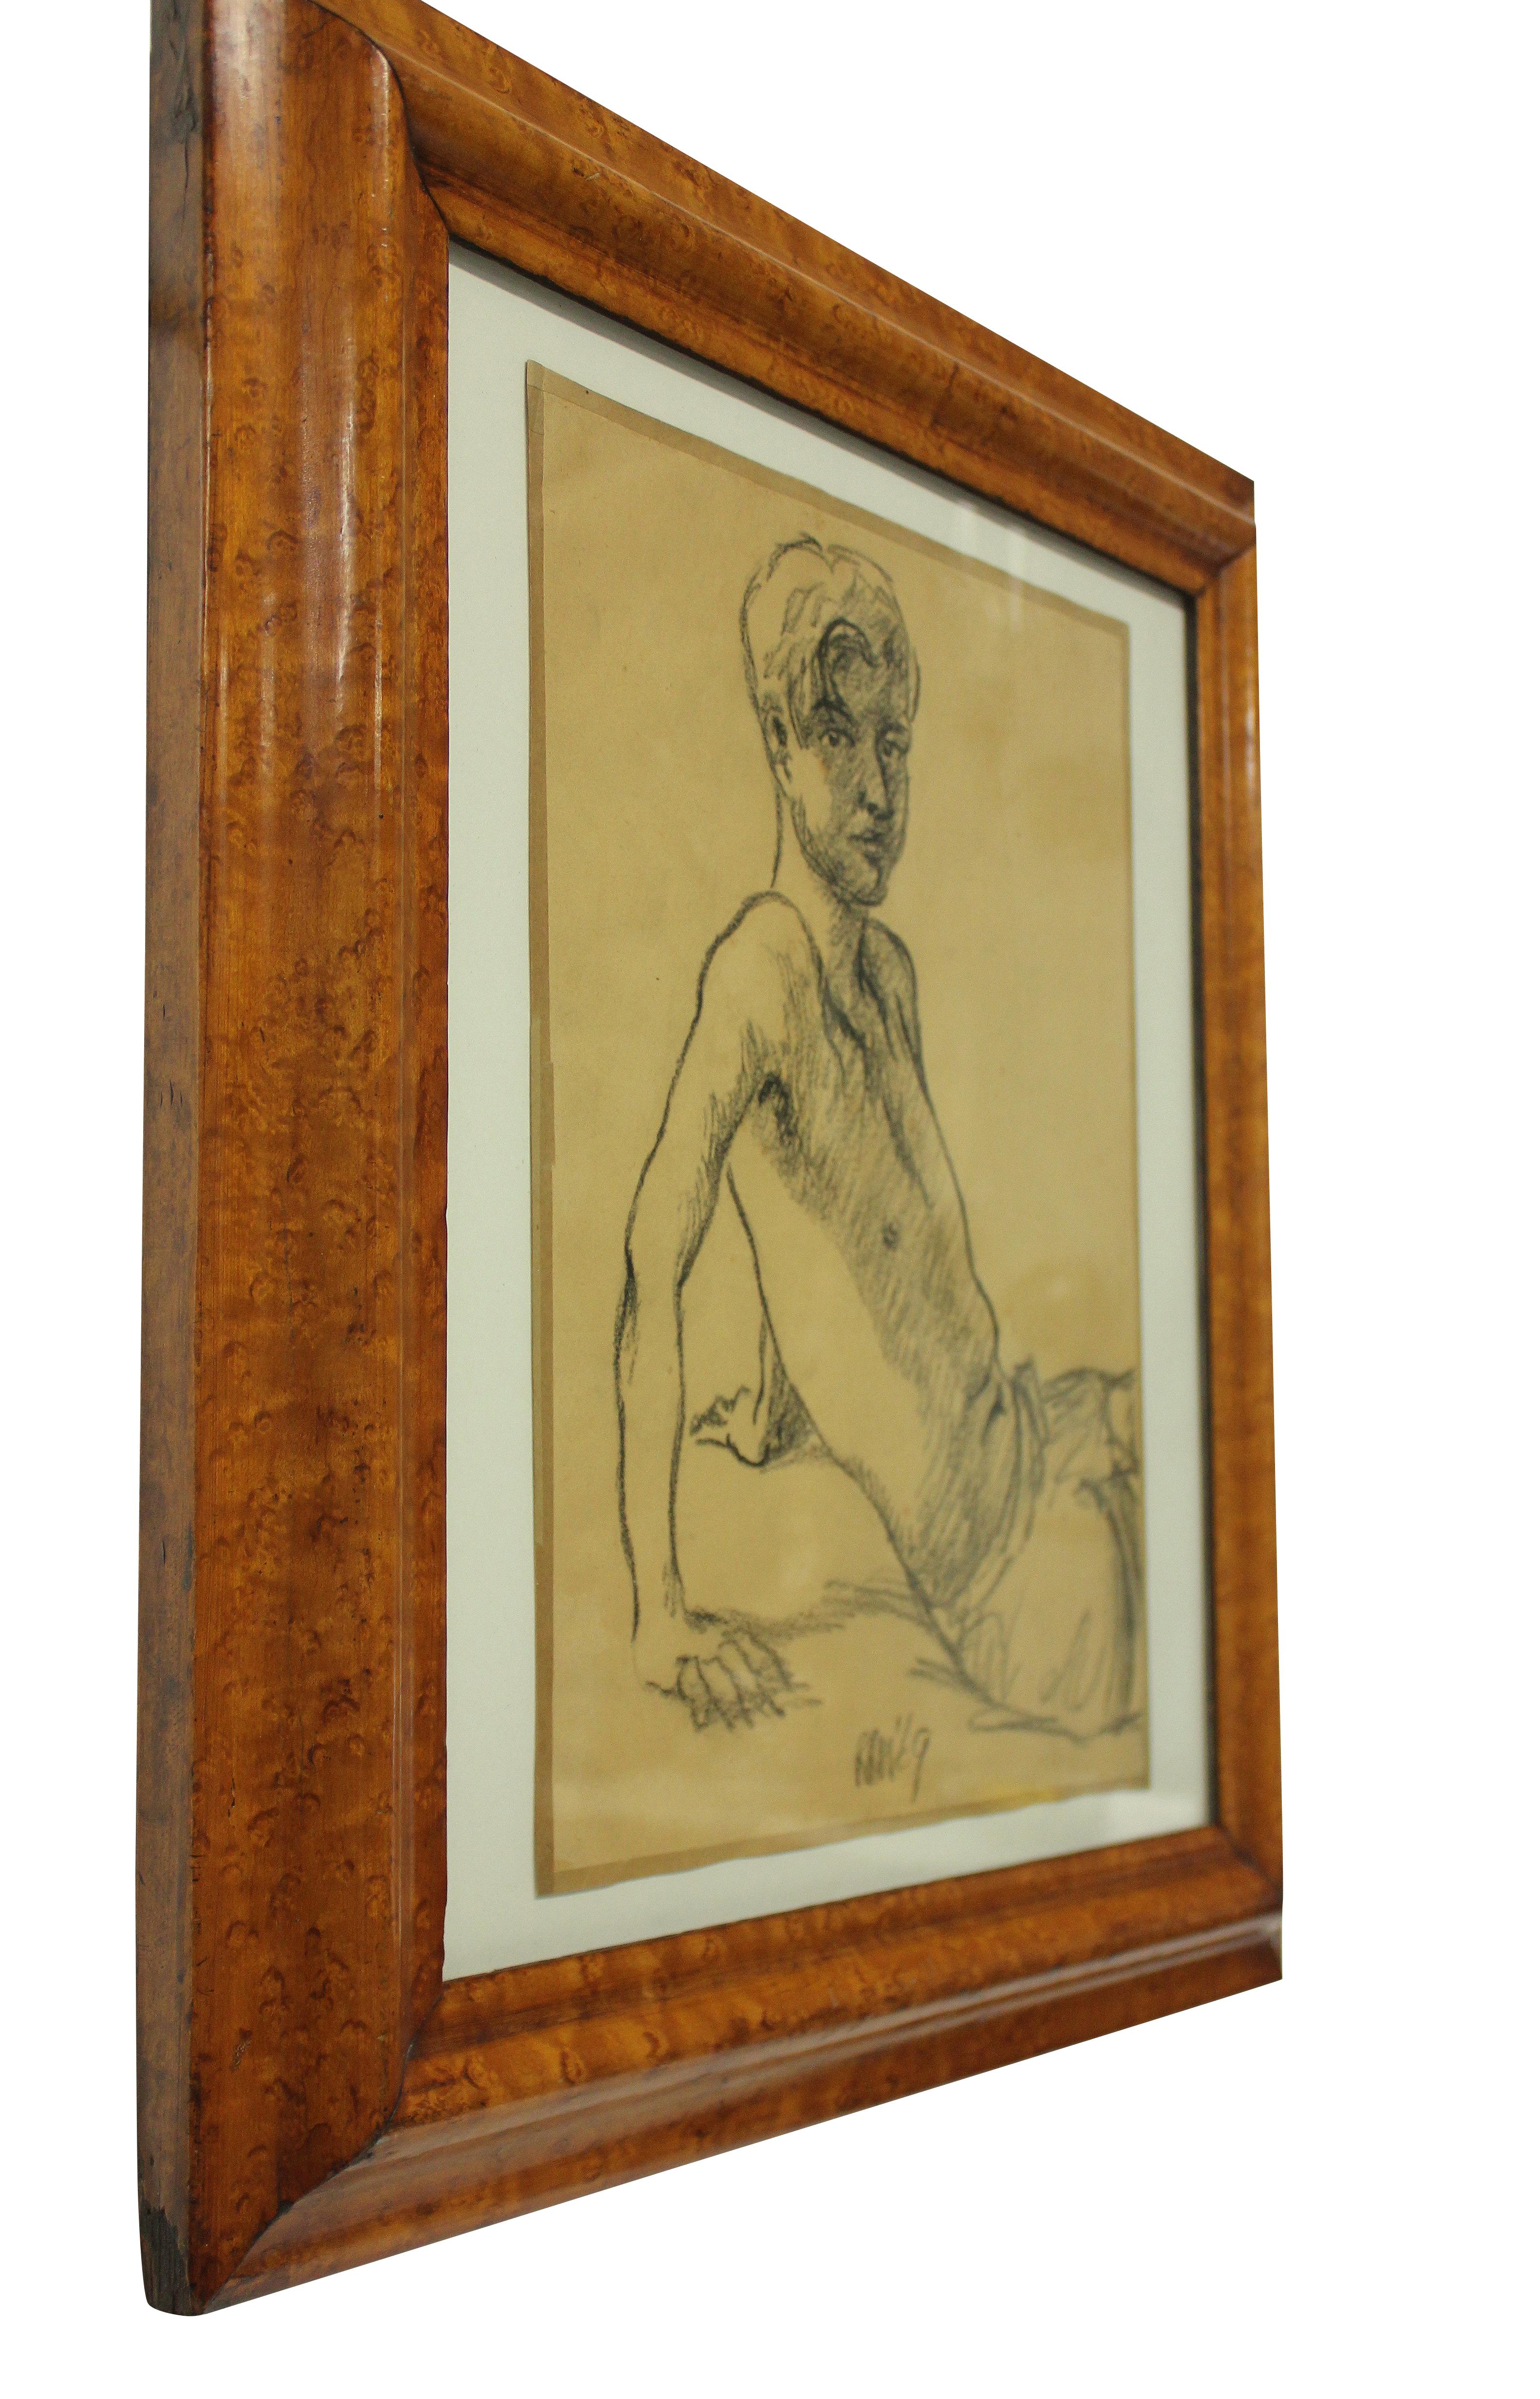 An English portrait of a young man in charcoal on parchment, framed in walnut. Dated and signed 1969.